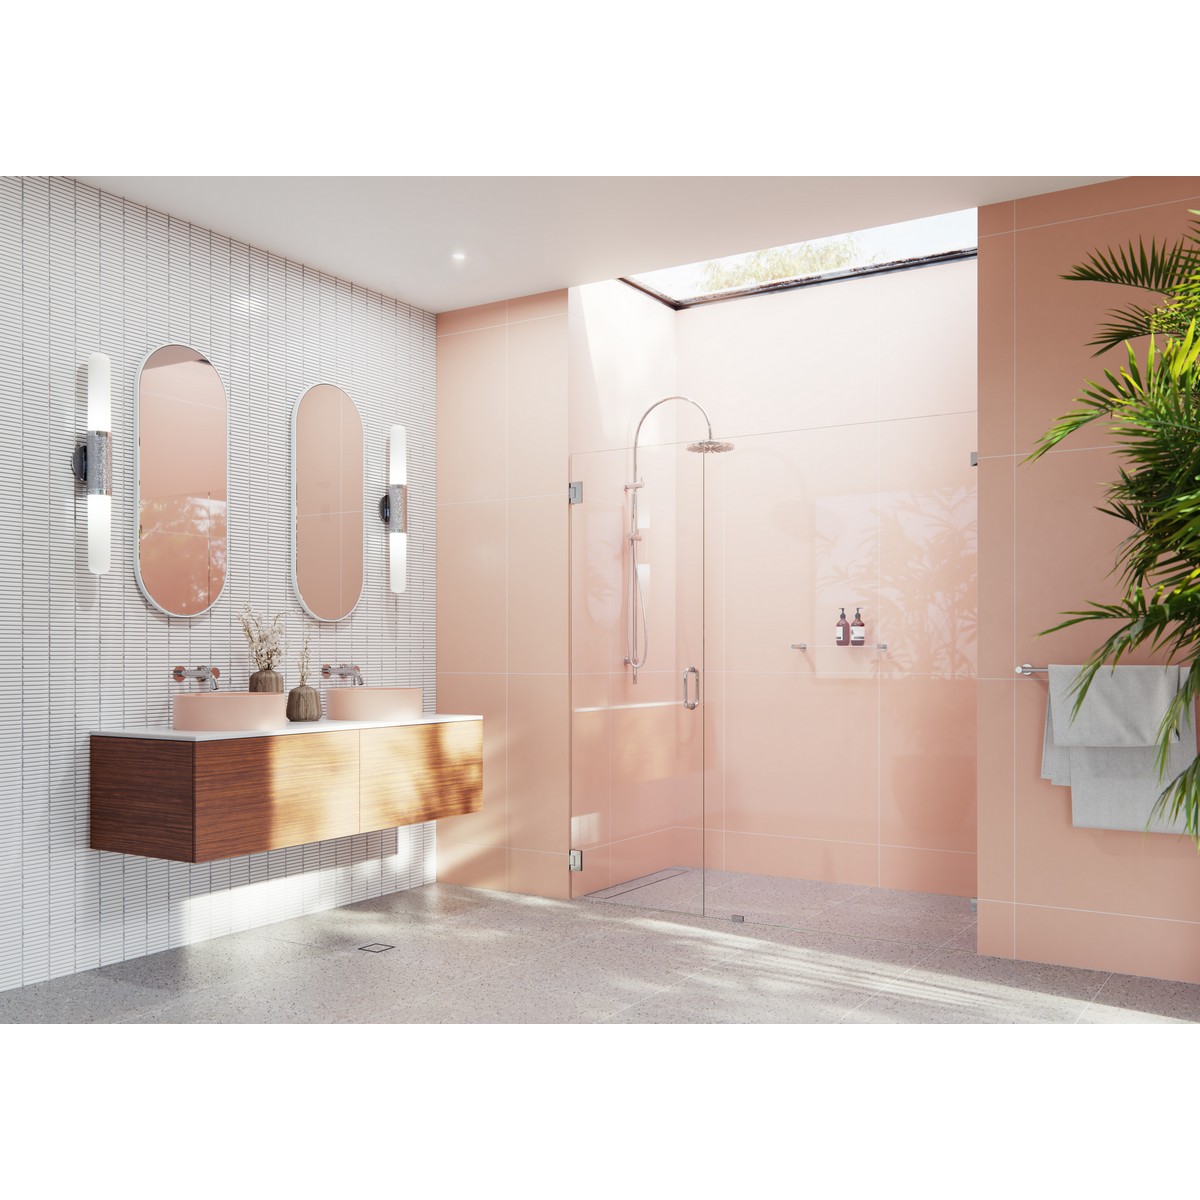 GLASS WAREHOUSE GW-WH-67.75 ILLUME 67 3/4 W X 78 H WALL HINGED FULLY FRAMELESS GLASS SHOWER ENCLOSURE